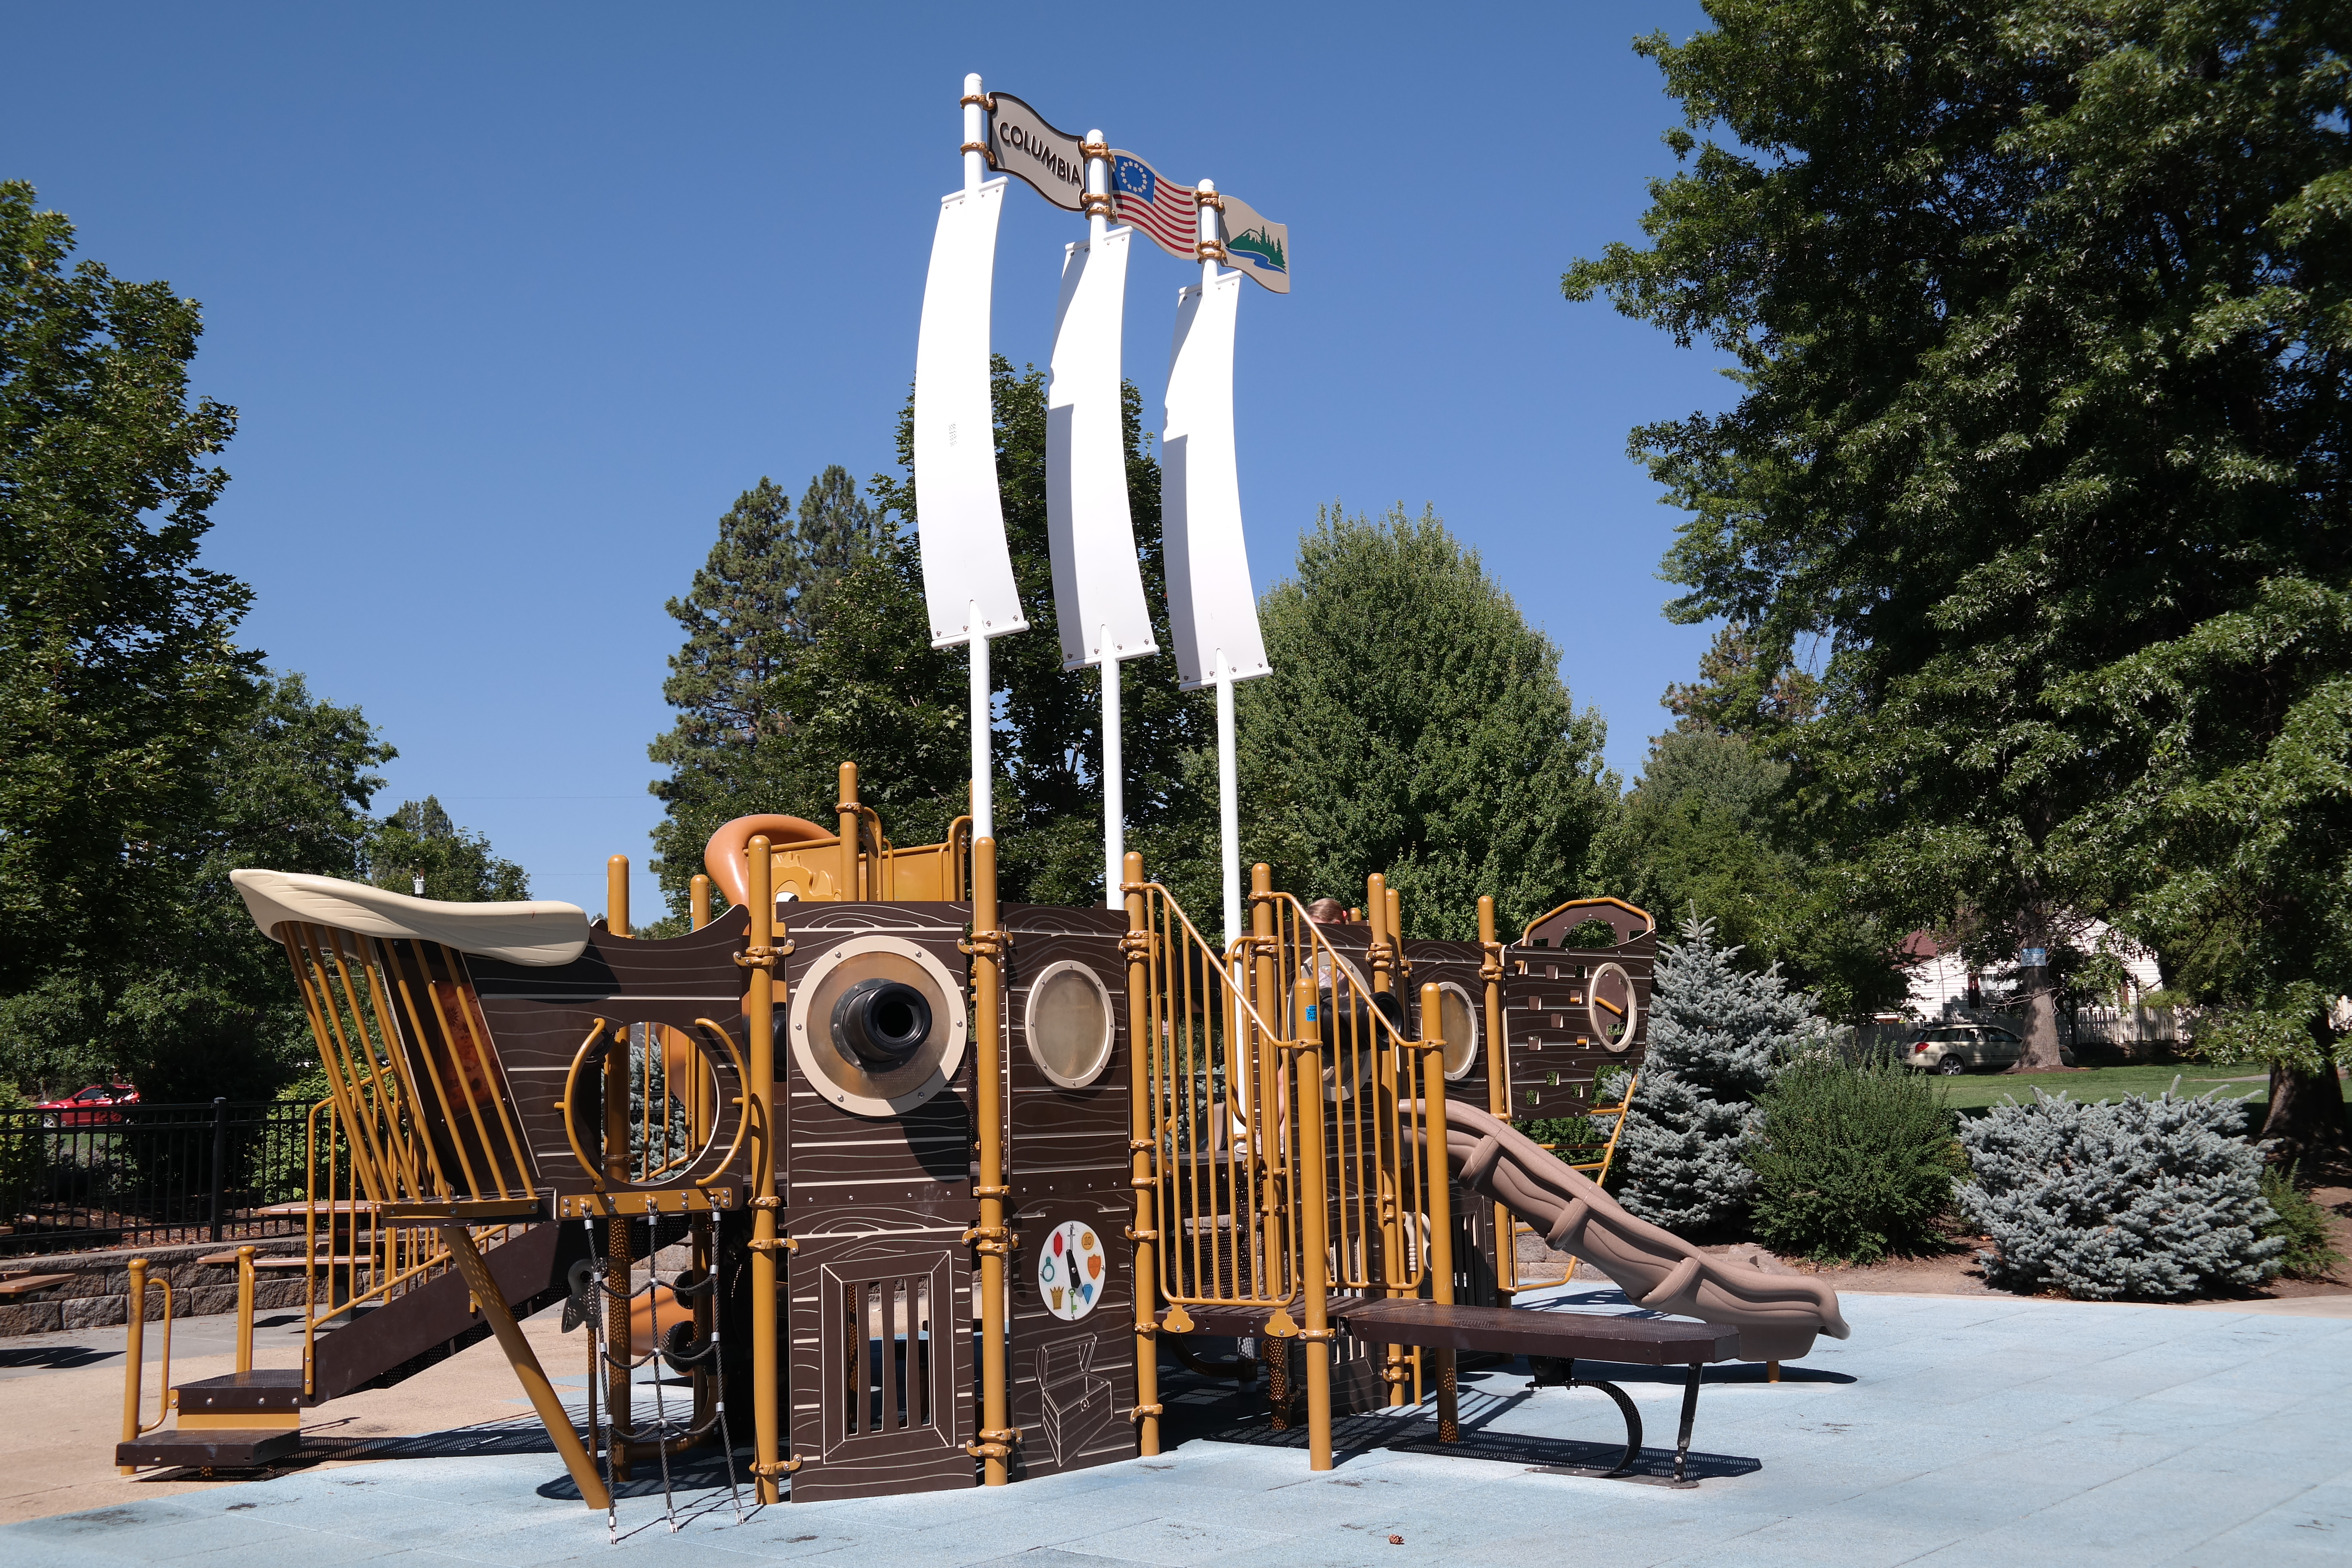 the pirate ship play structure at columbia park